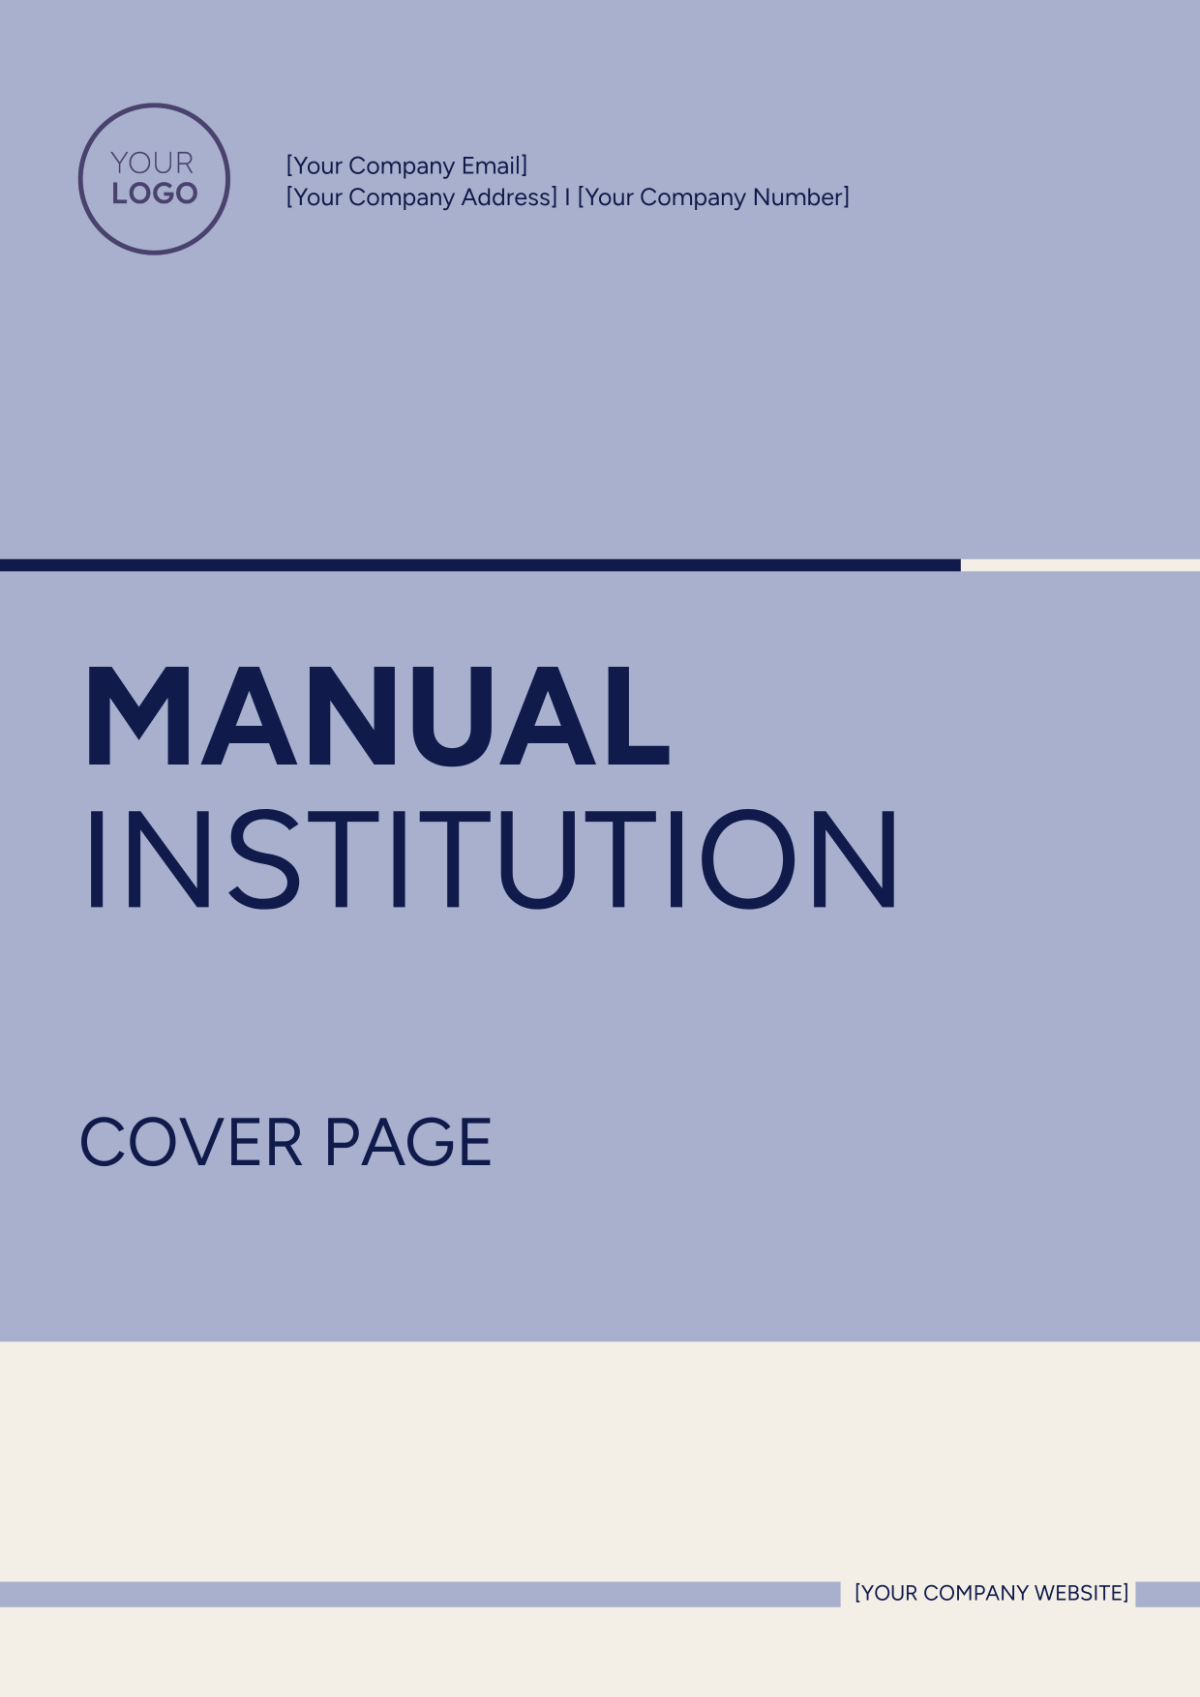 Manual Institutional Cover Page